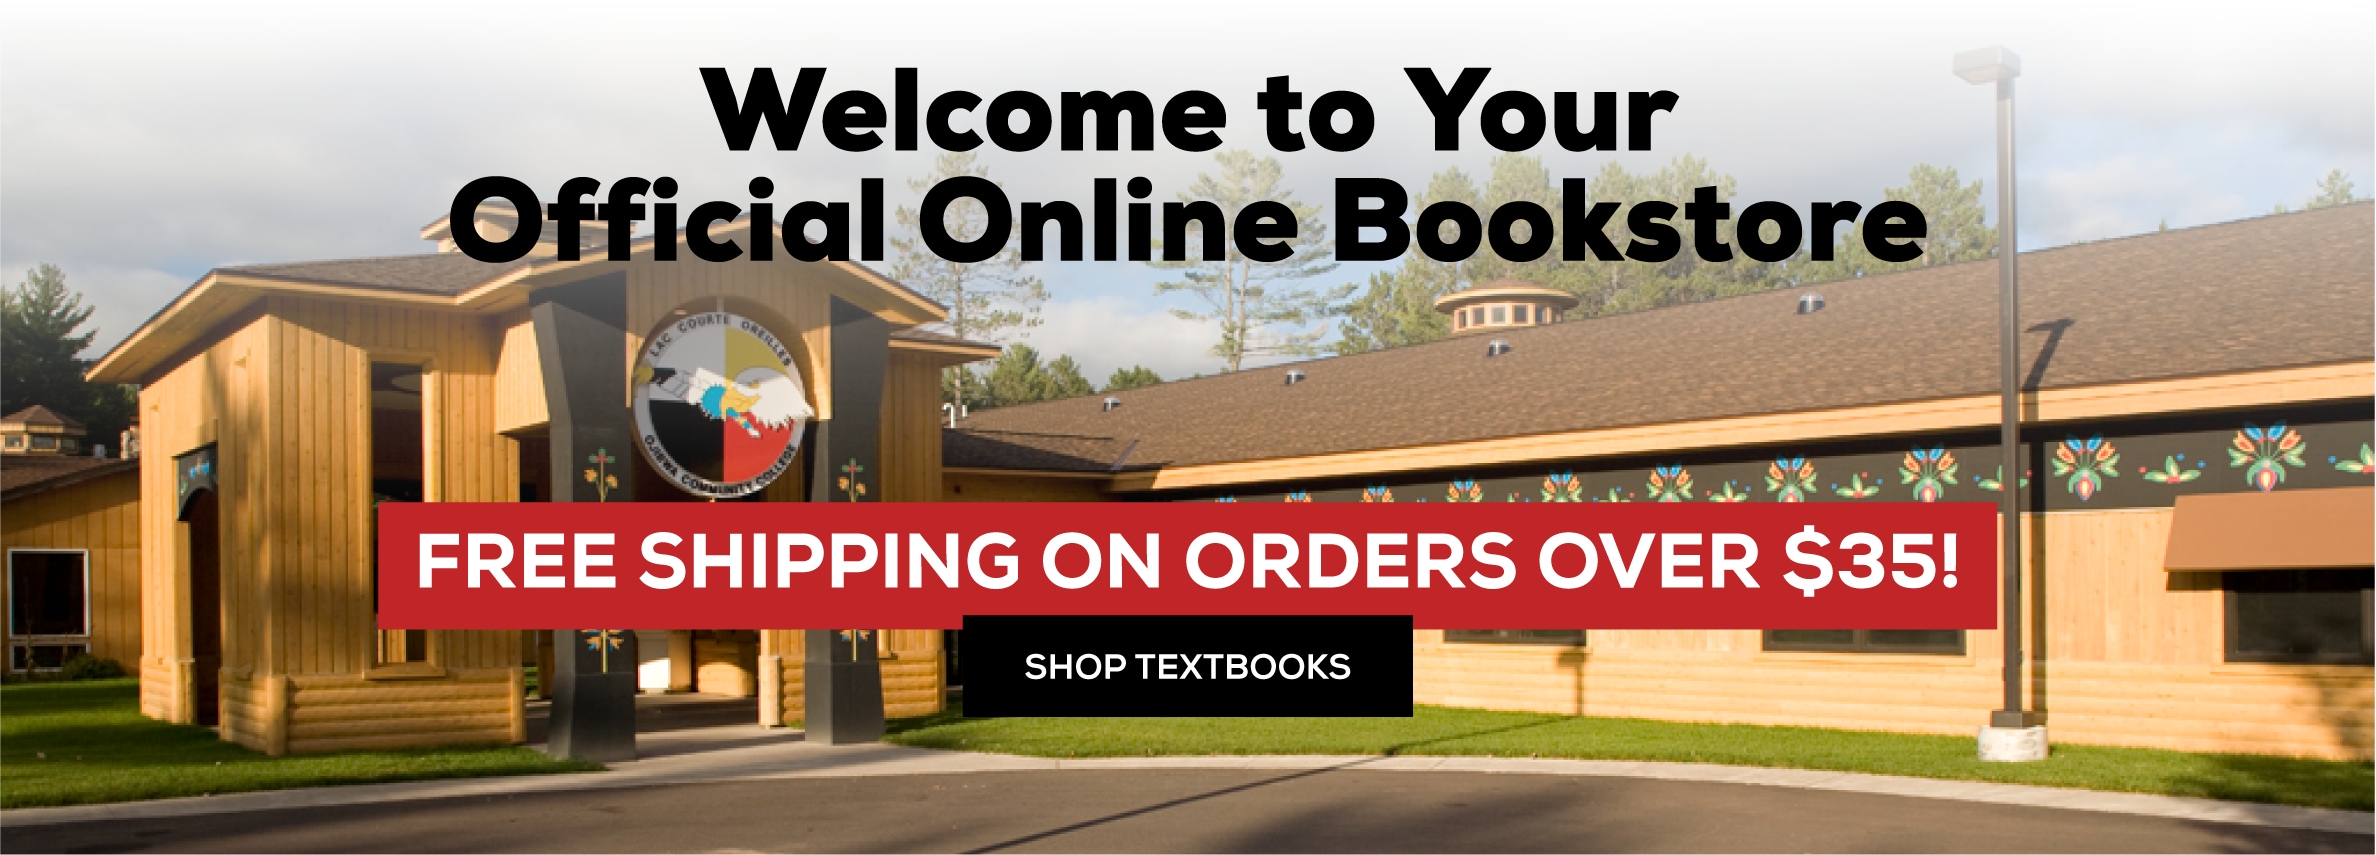 Welcome to your official online bookstore. Free shipping on all orders over $35! Shop textbooks.